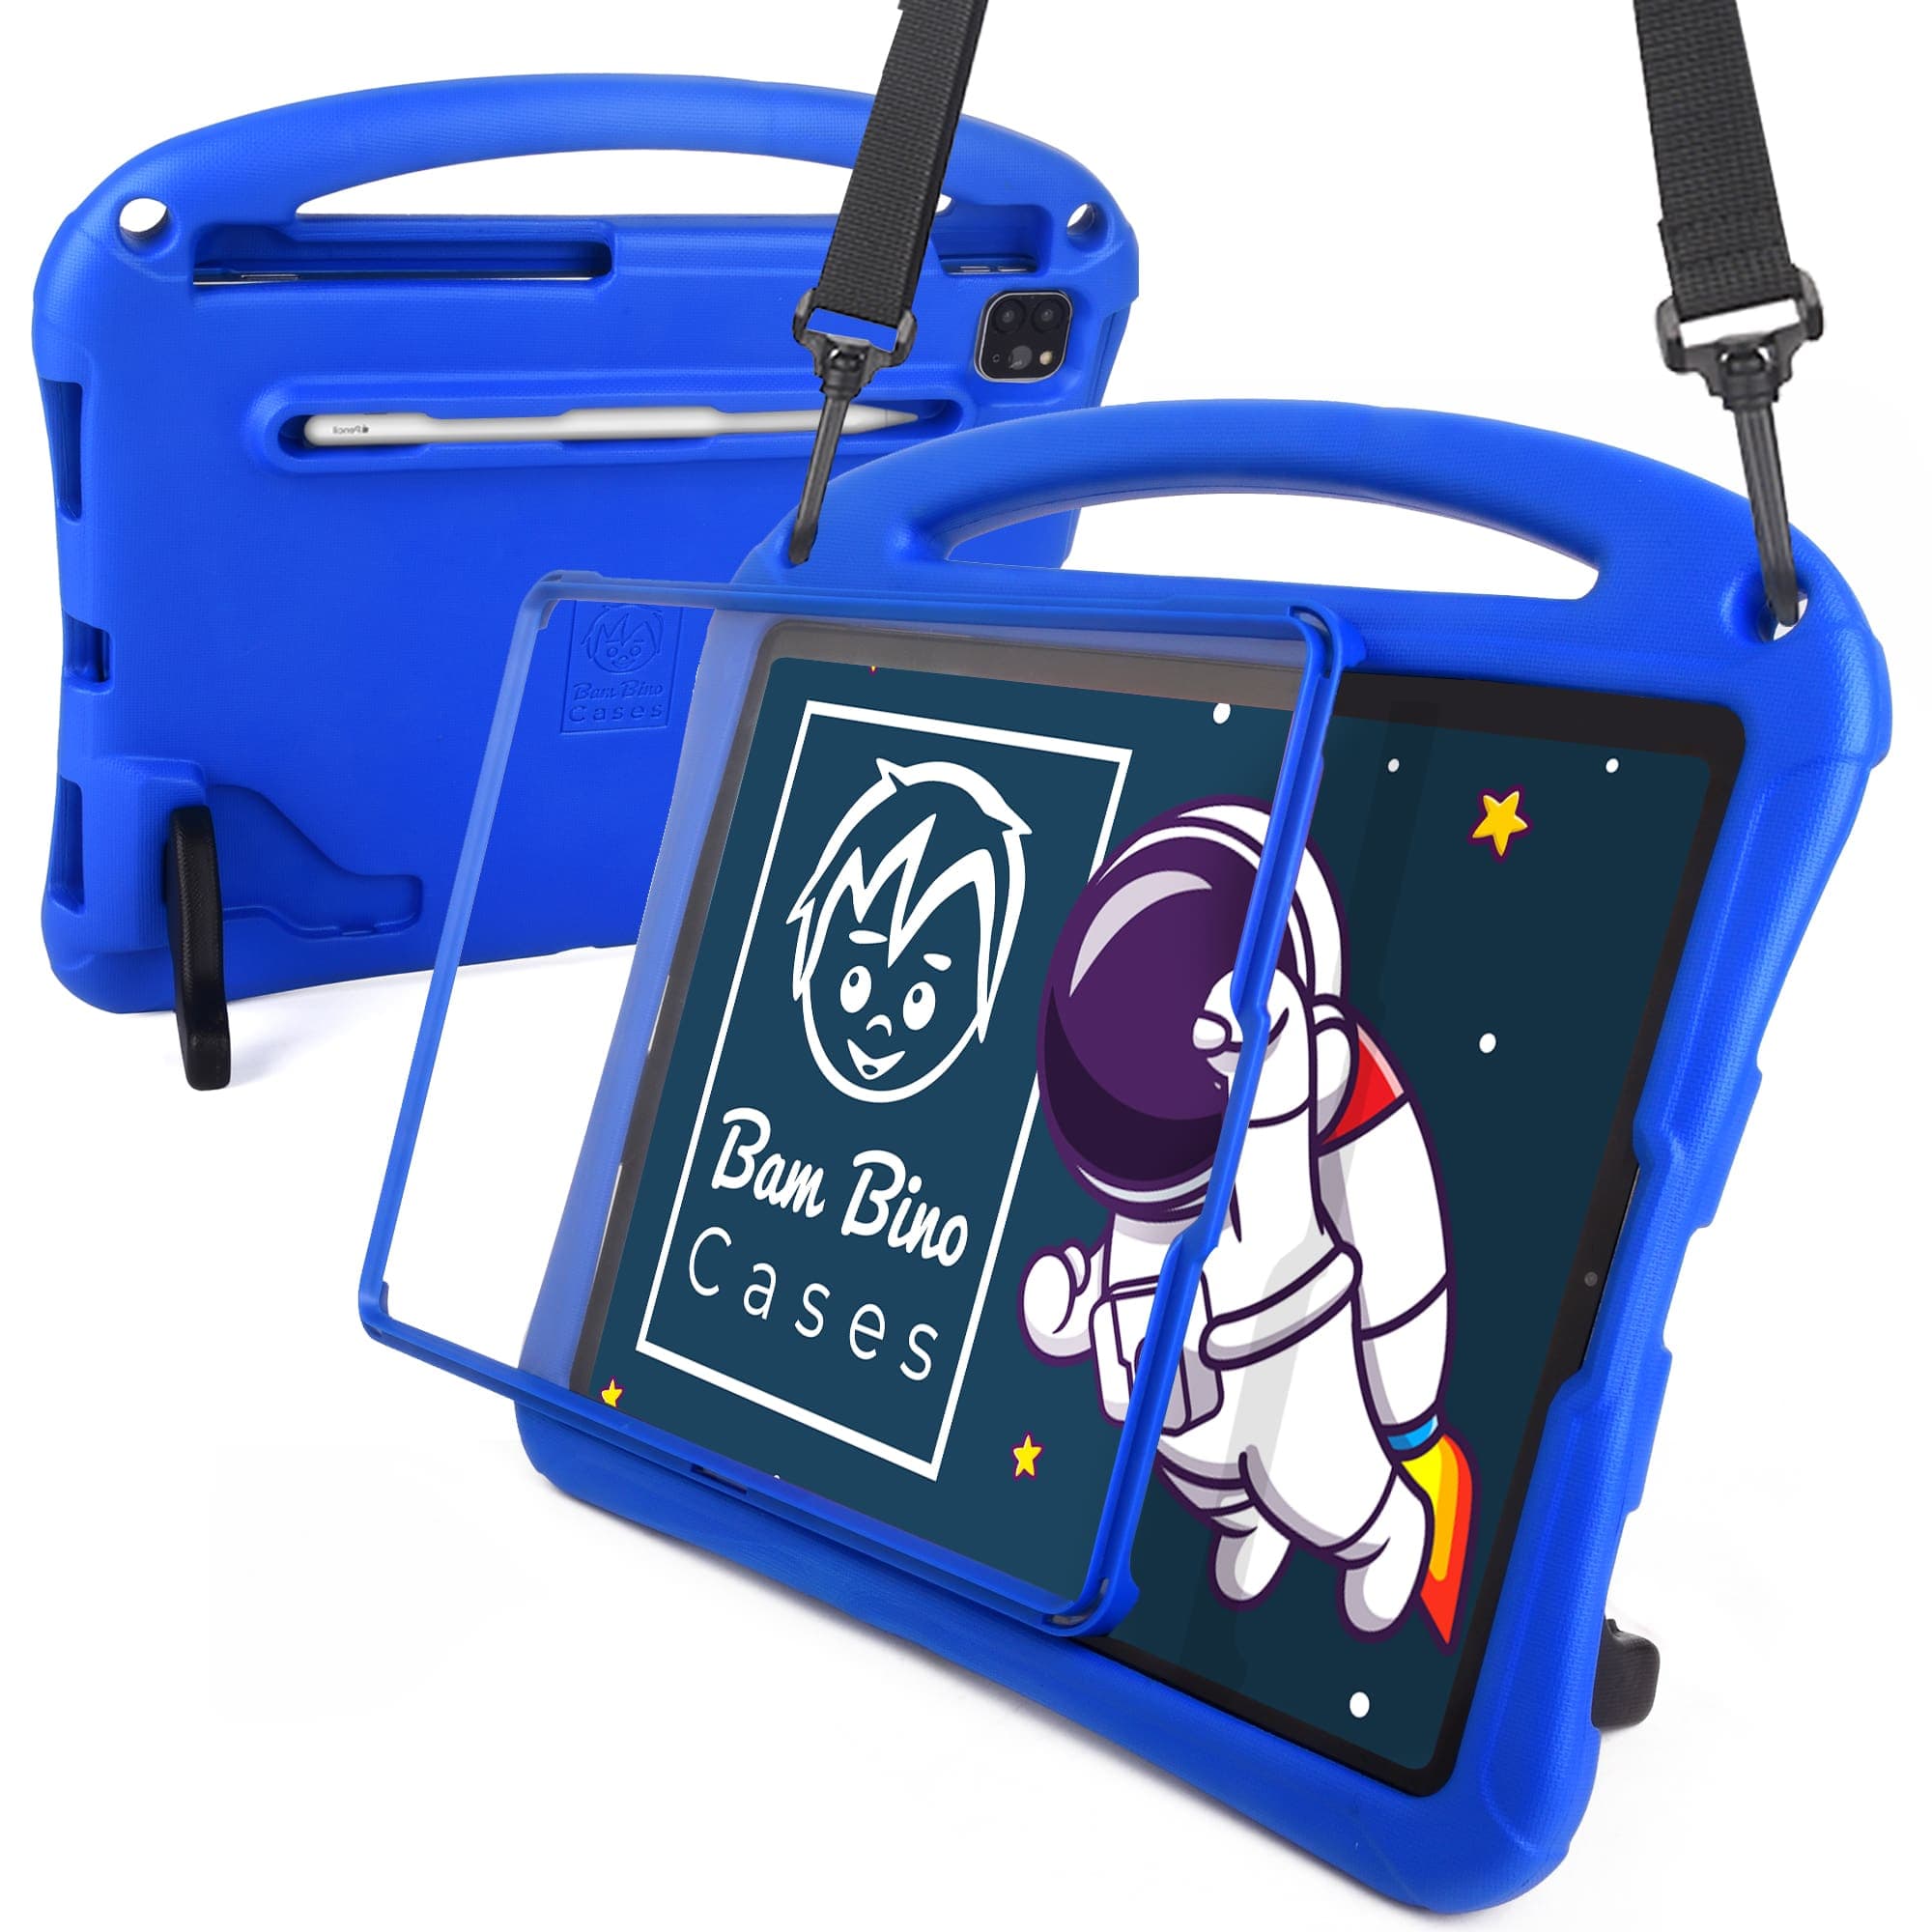 Bam Bino Space Suit Super Rugged Kids Case with Screen Guard for Samsung Galaxy Tab S5e 10.5